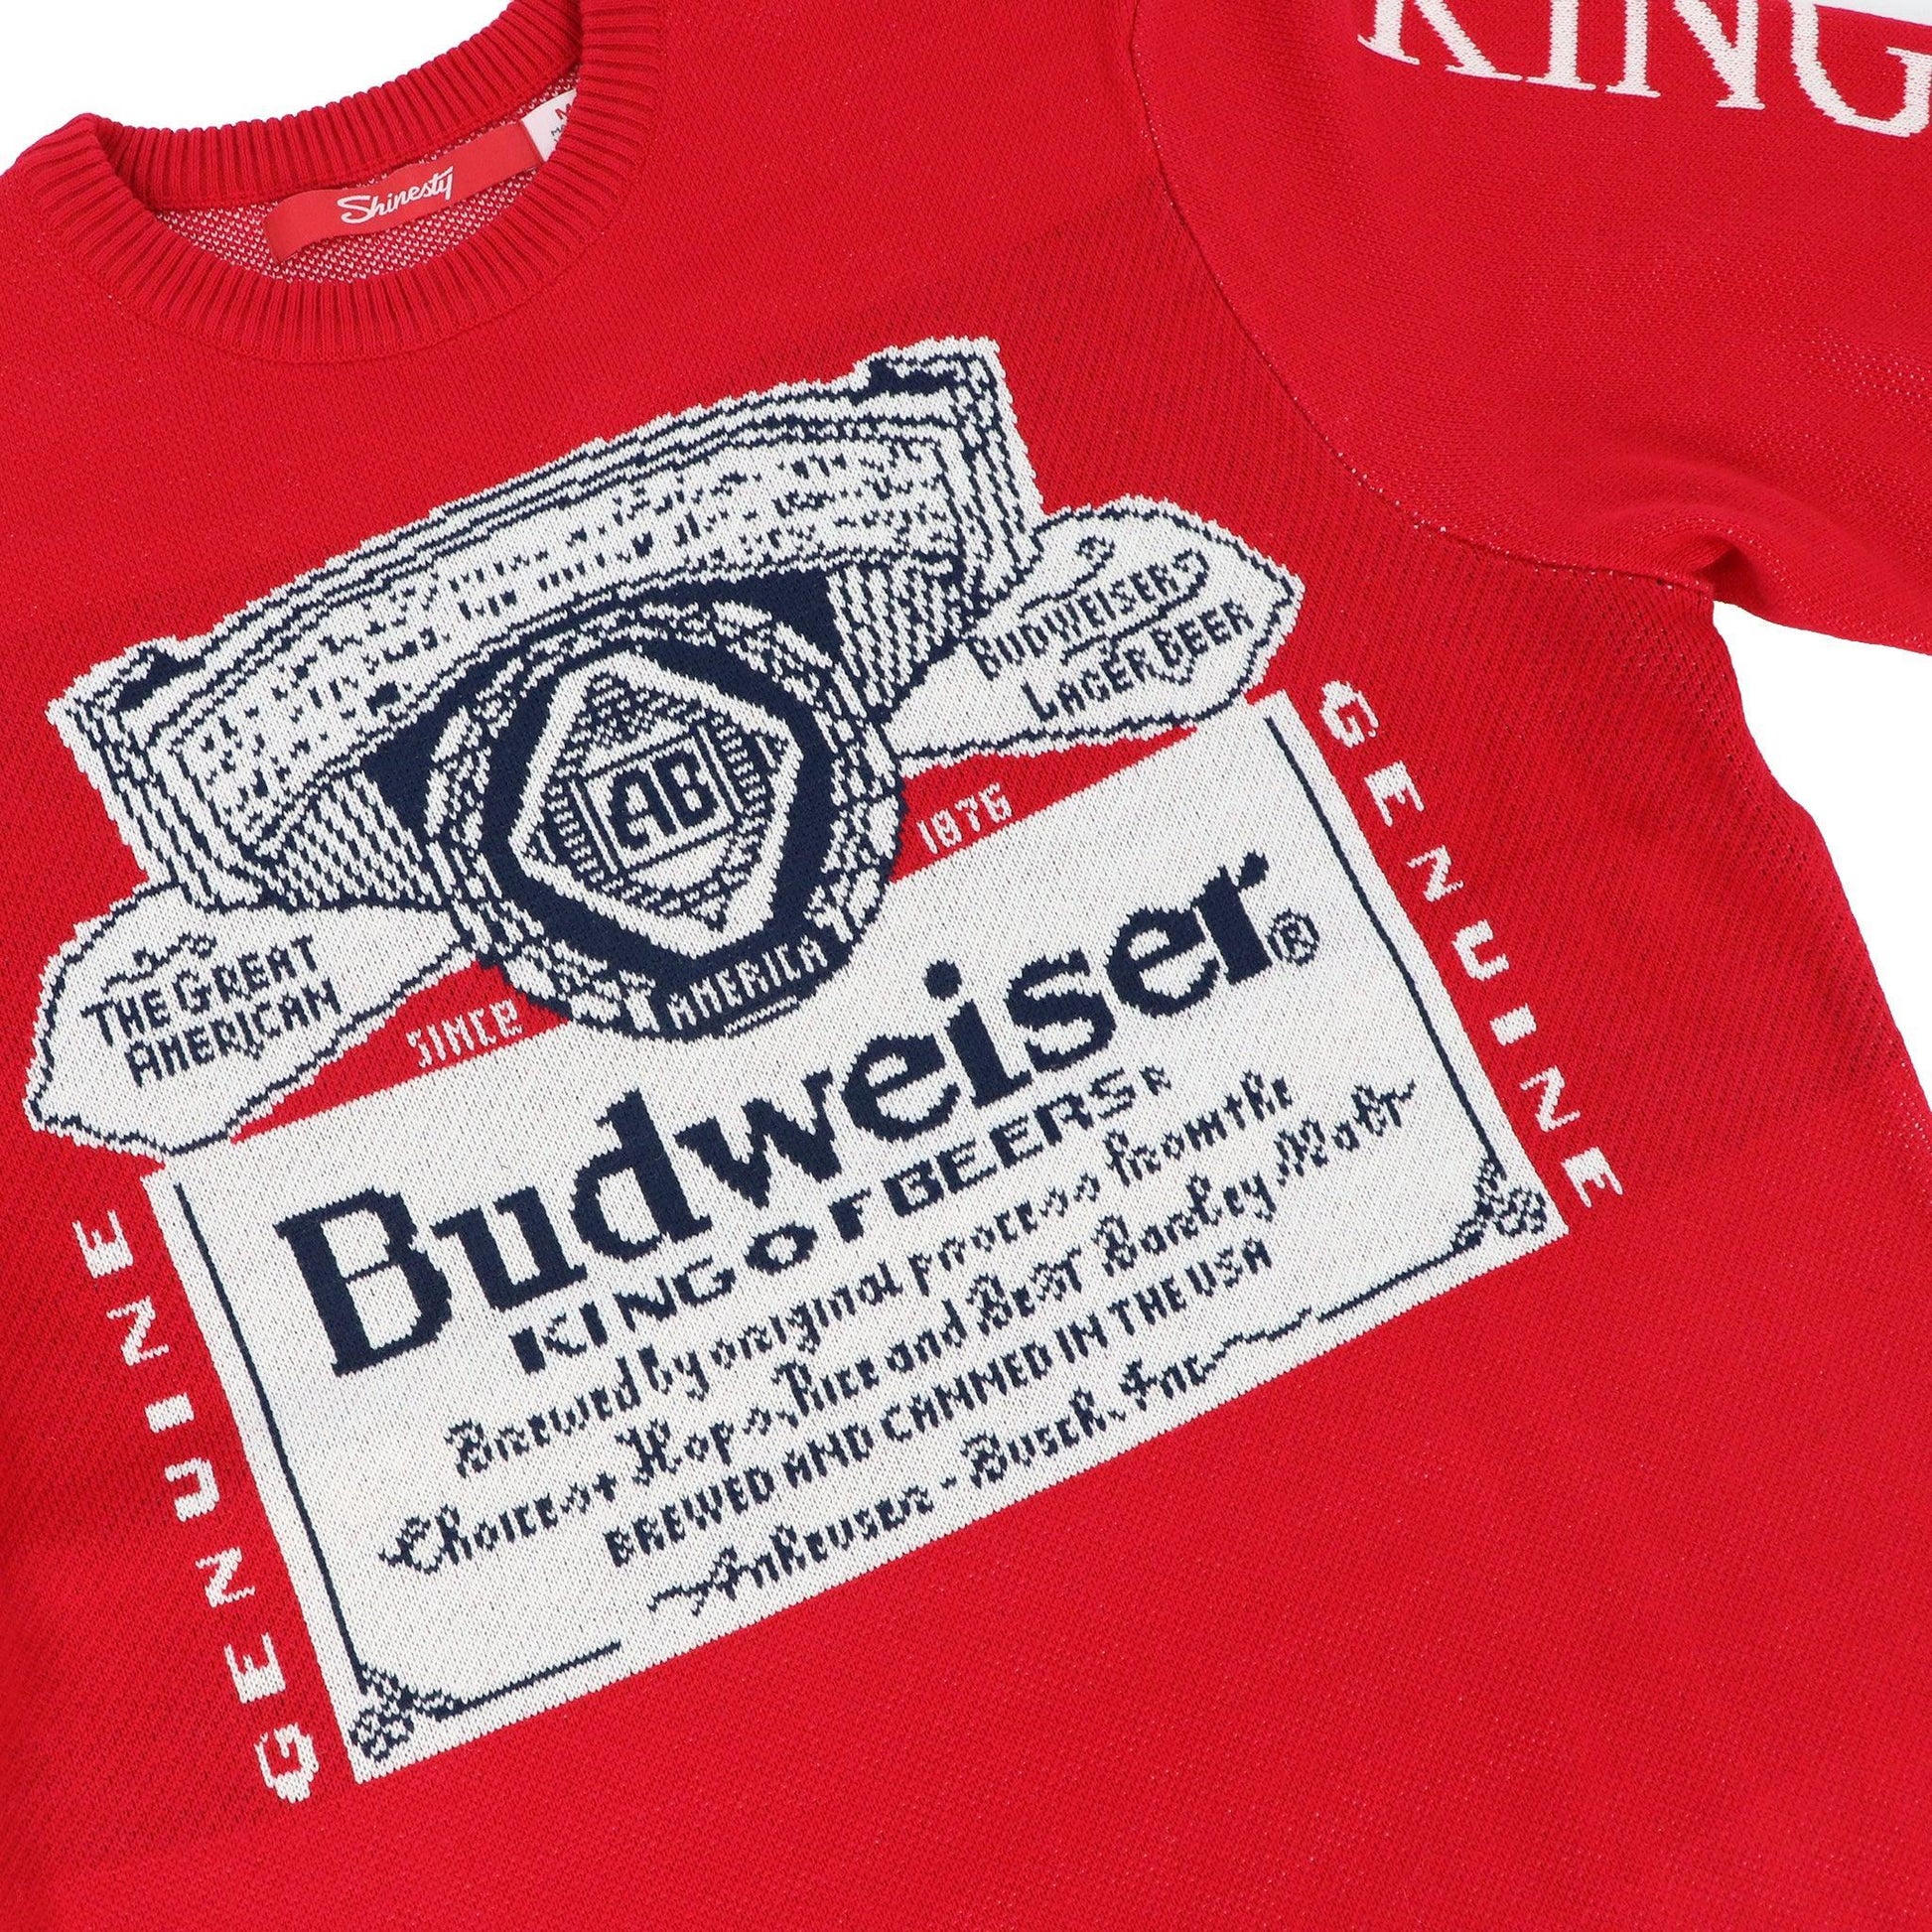 budweiser label sweater with king of beers on the left sleeve vertically